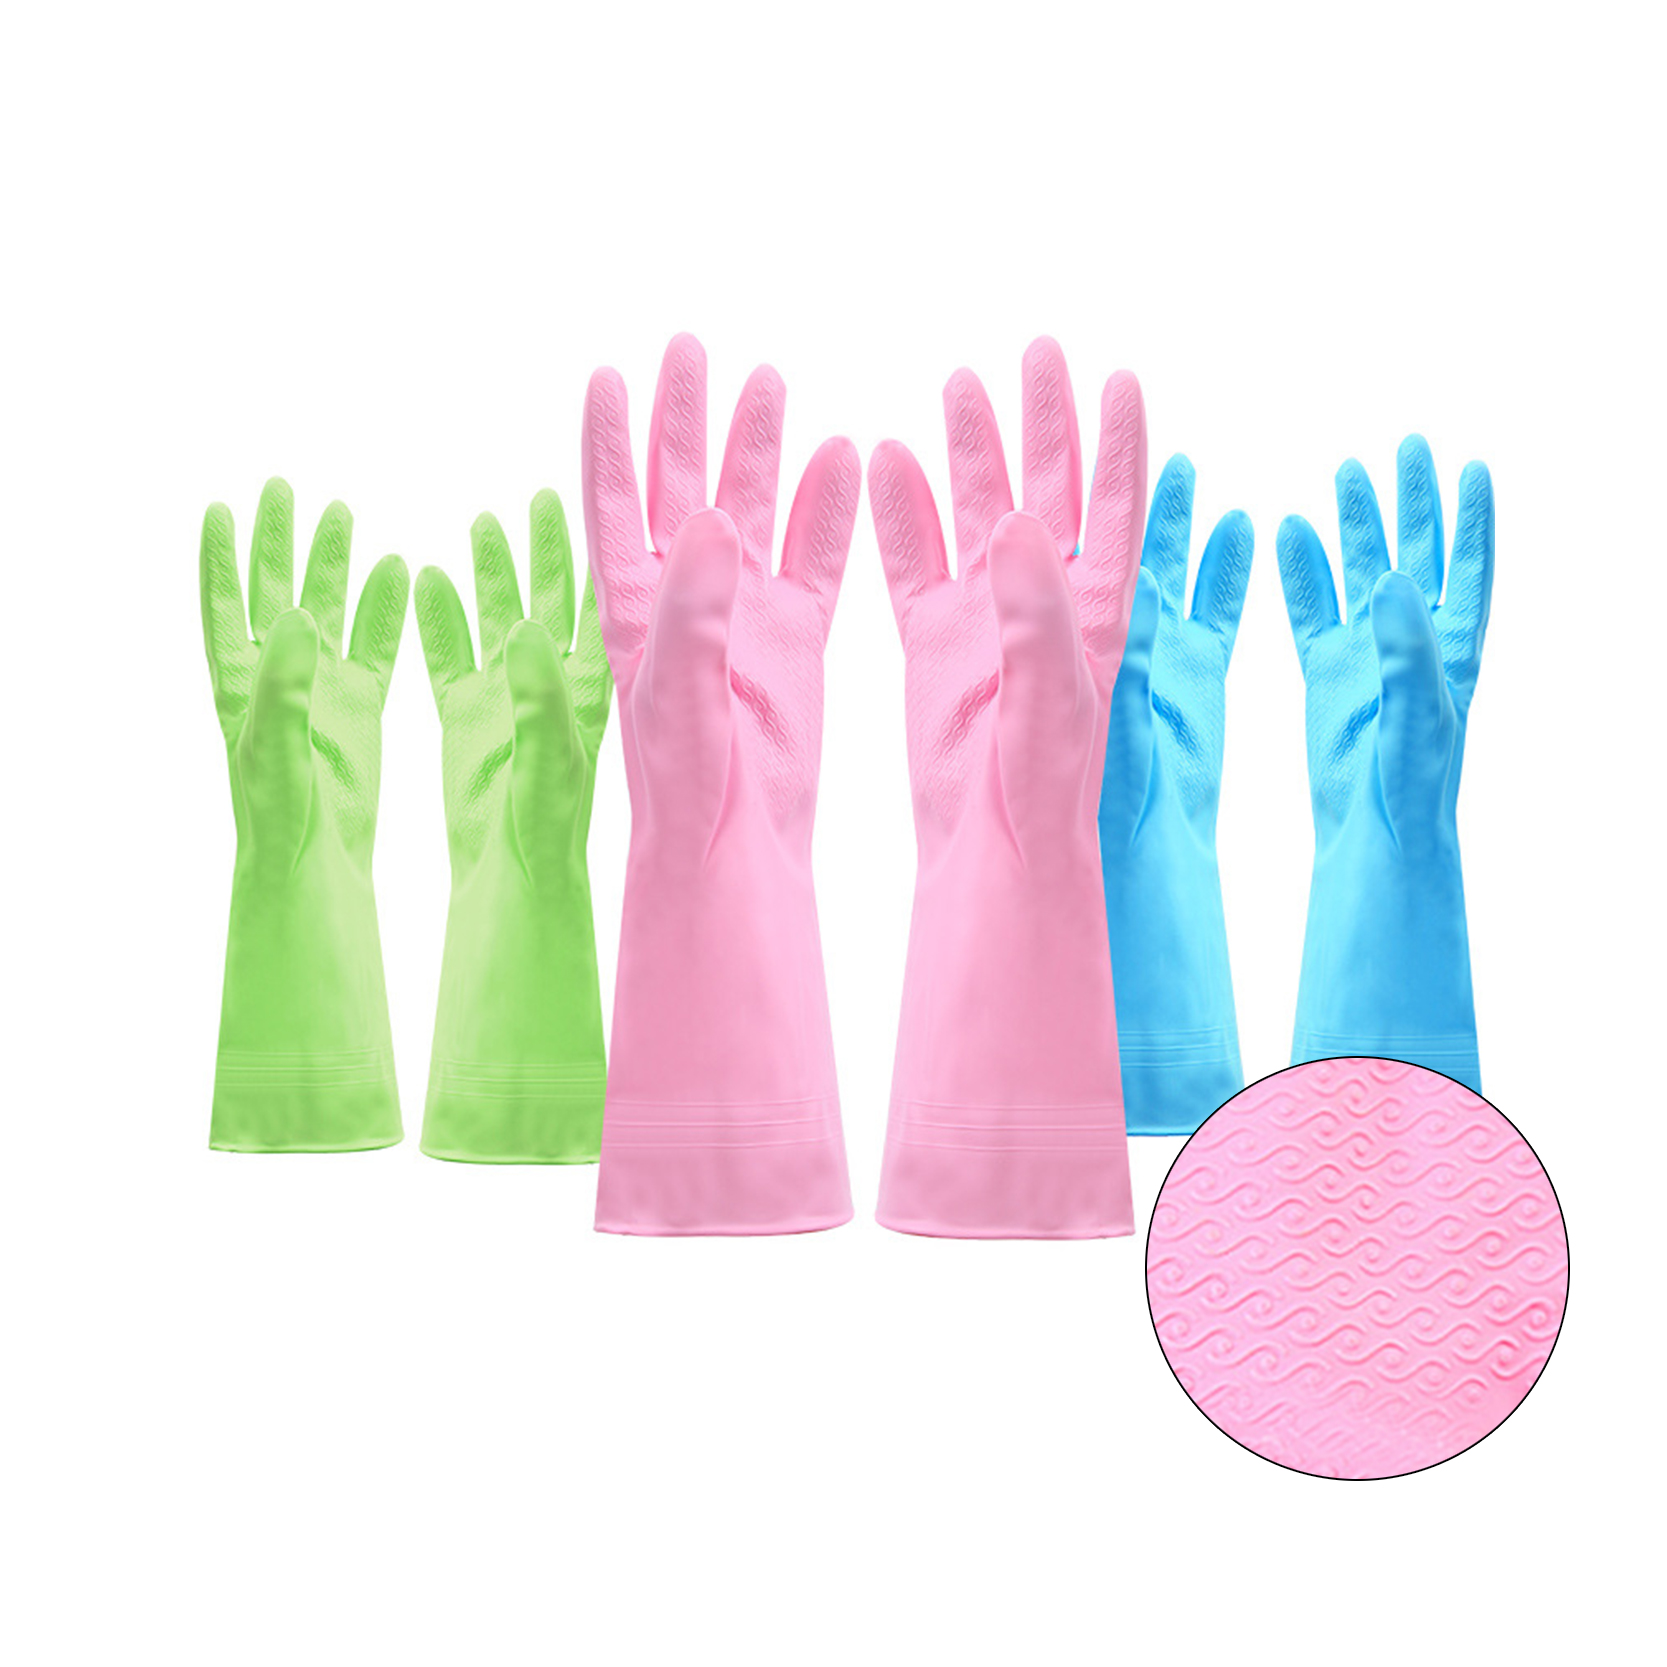 Reusable Kitchen Cleaning Gloves With Latex Free Non-Slip Swirl Grip Gloves for Dishwashing Featured Duab